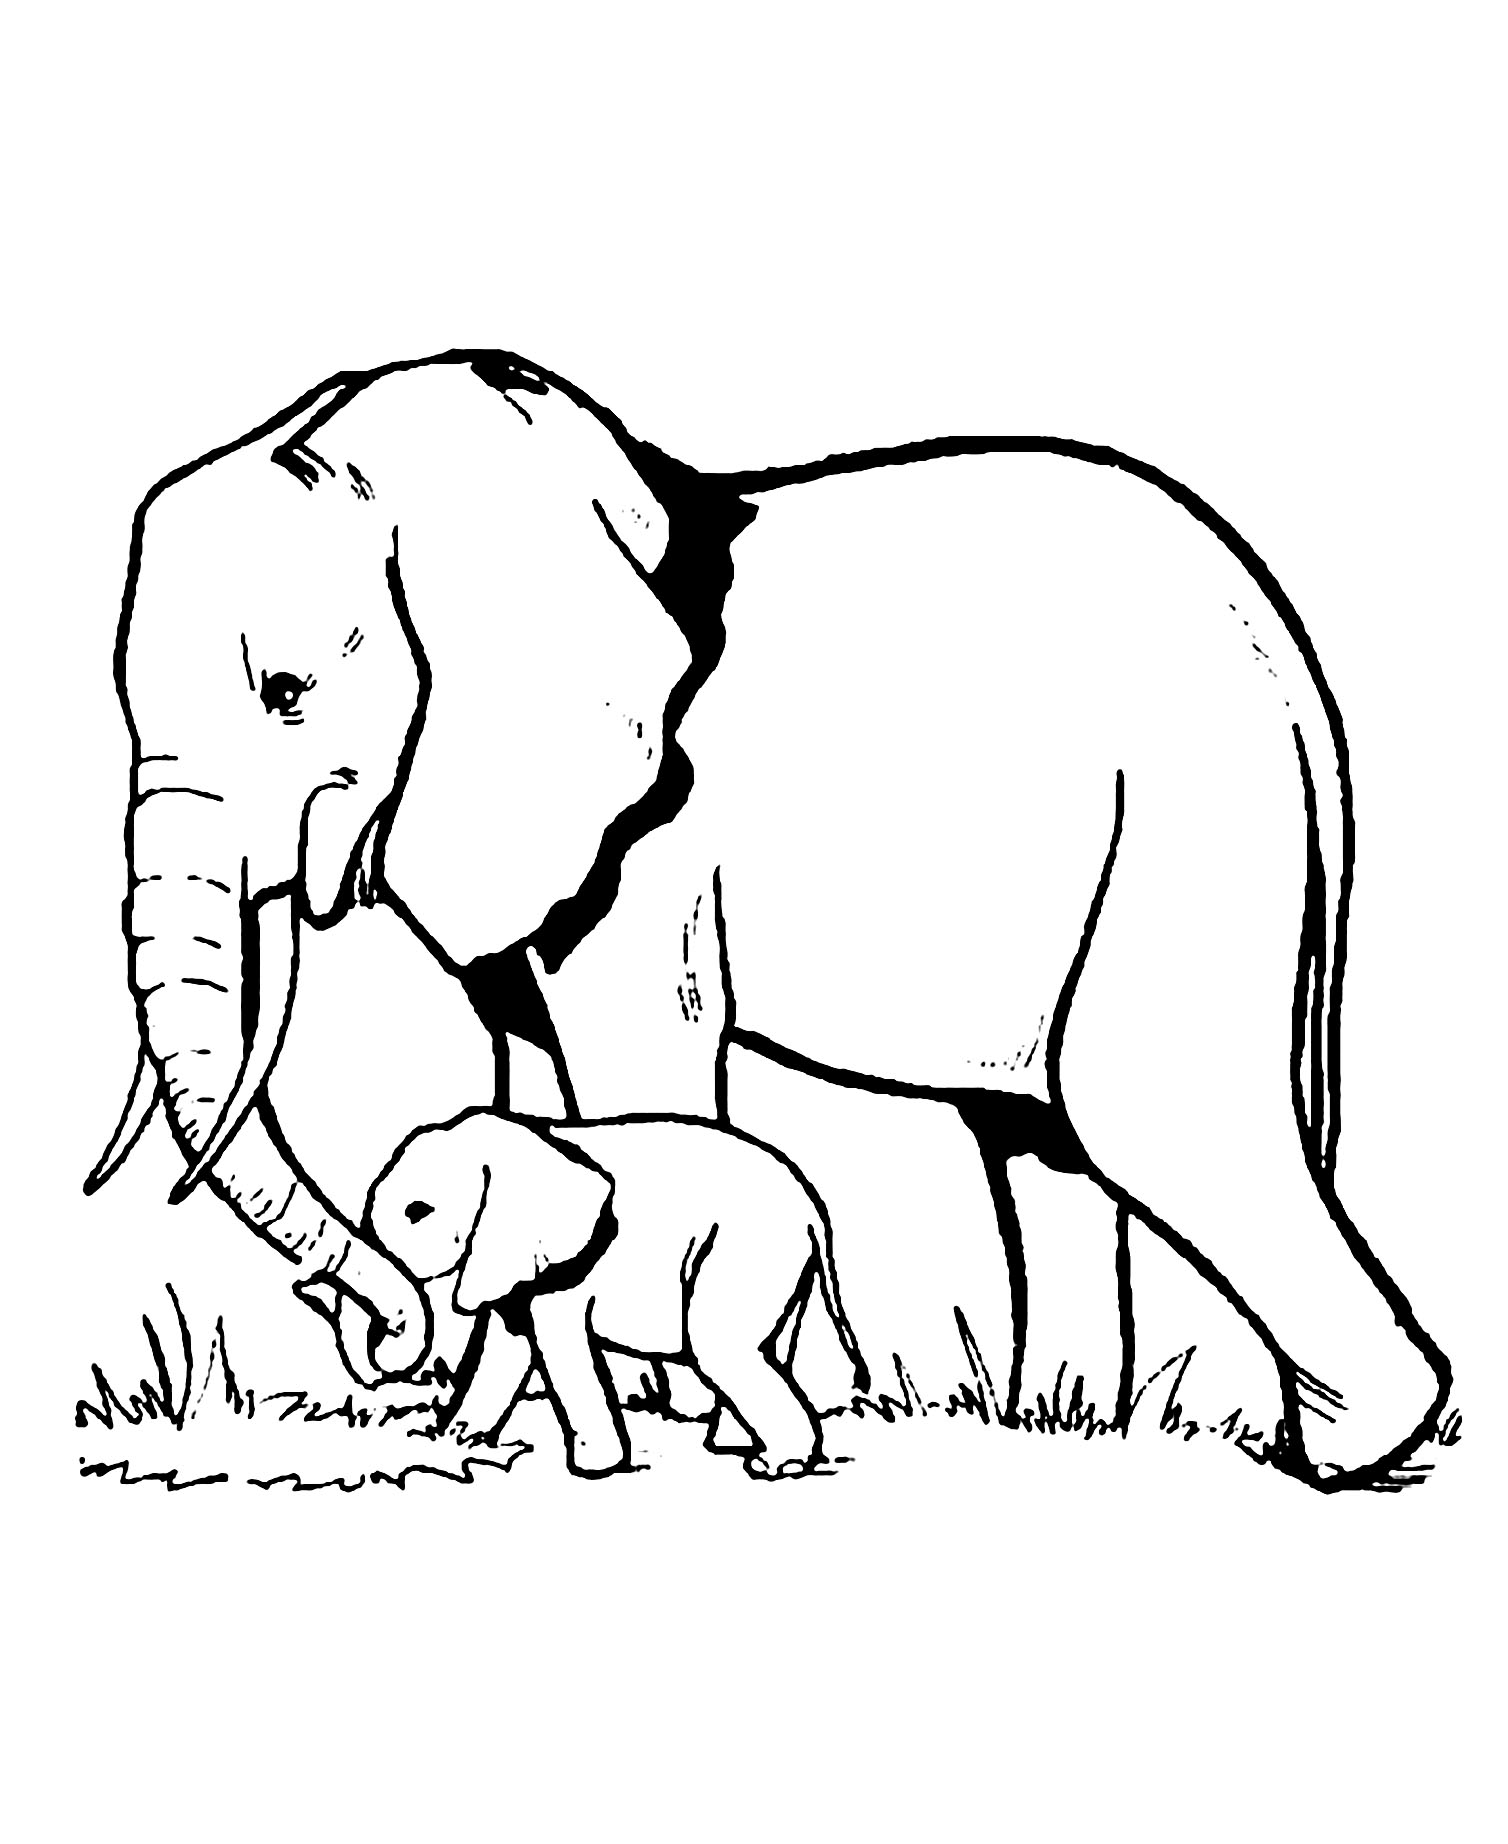 Best Coloring Pages For Children Elephants coloring page